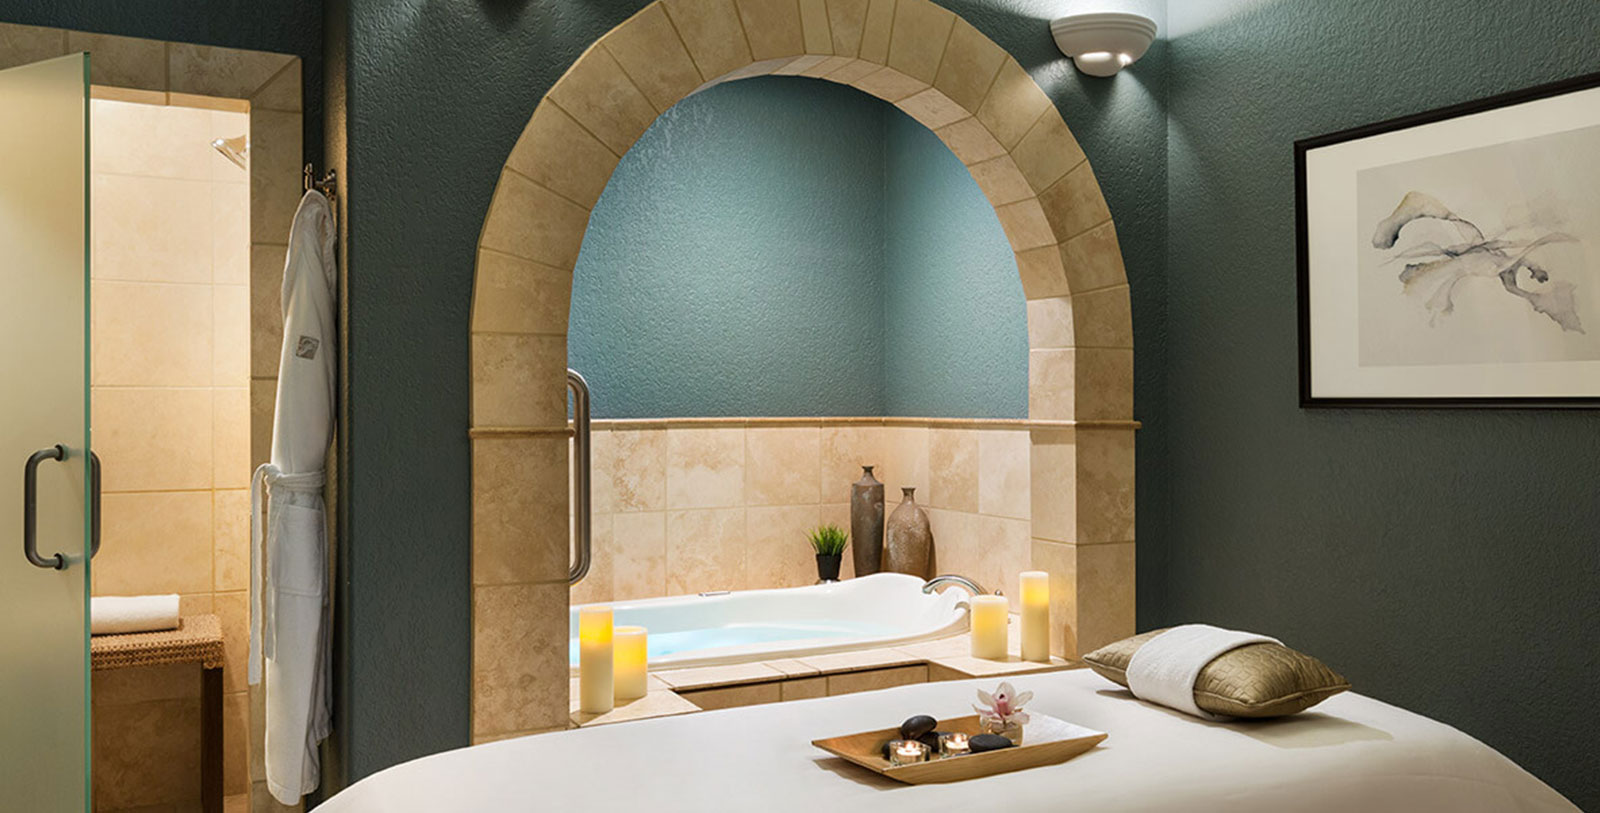 Experience a rejuvenating day of pampering at the Spa at Fairmont Chateau Lake Louise.